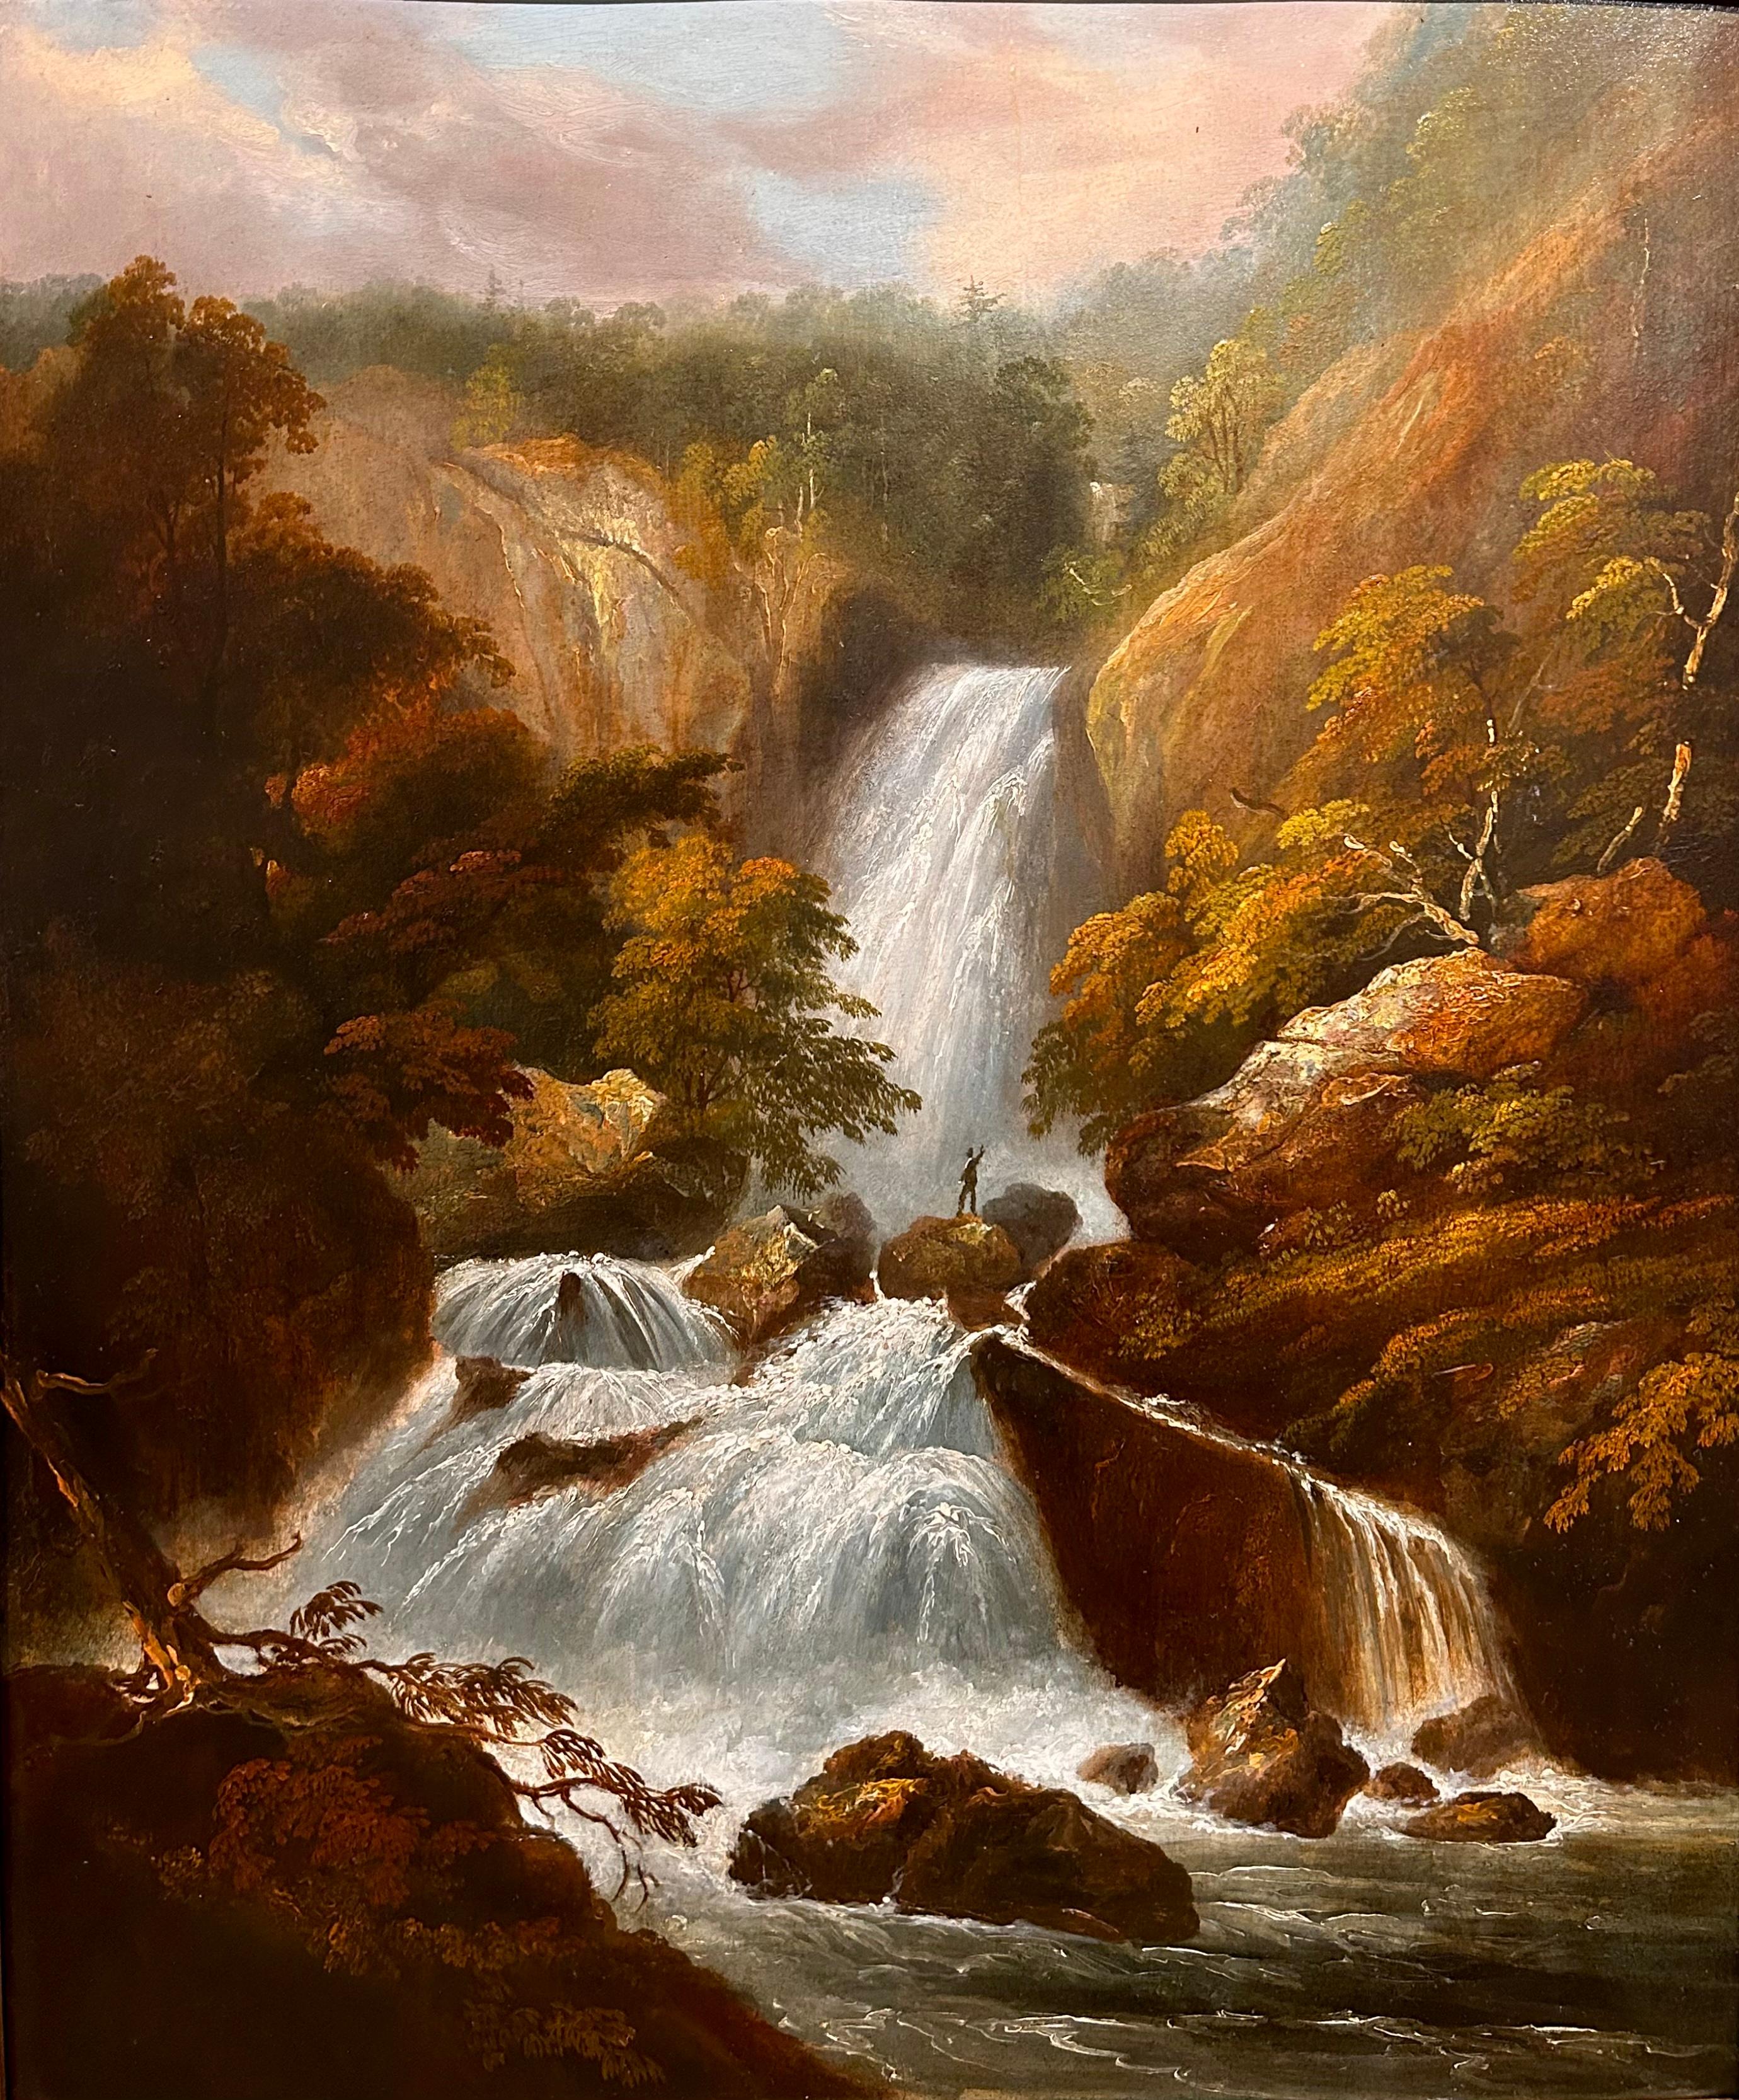 Oil Landscape of Waterfall - Hudson River School Painting by William Guy Wall